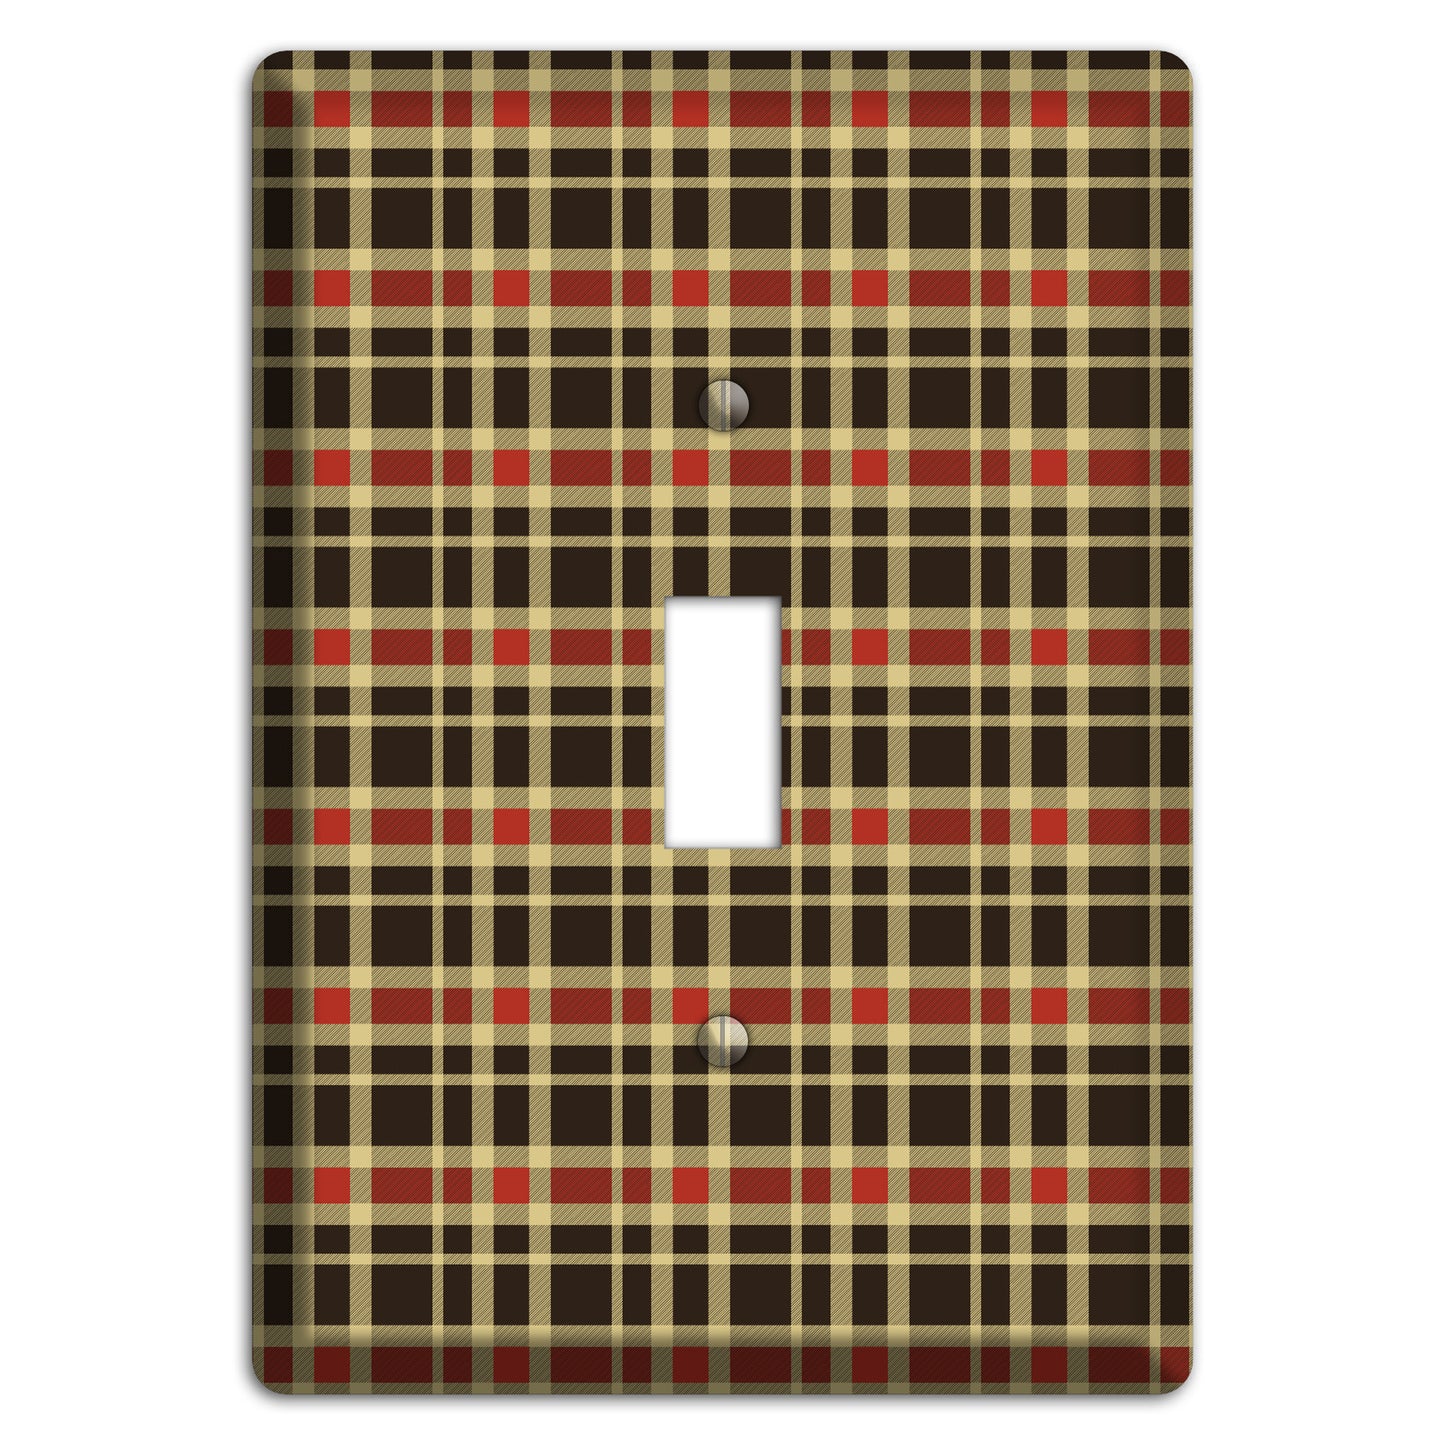 Maroon and Black Plaid Cover Plates